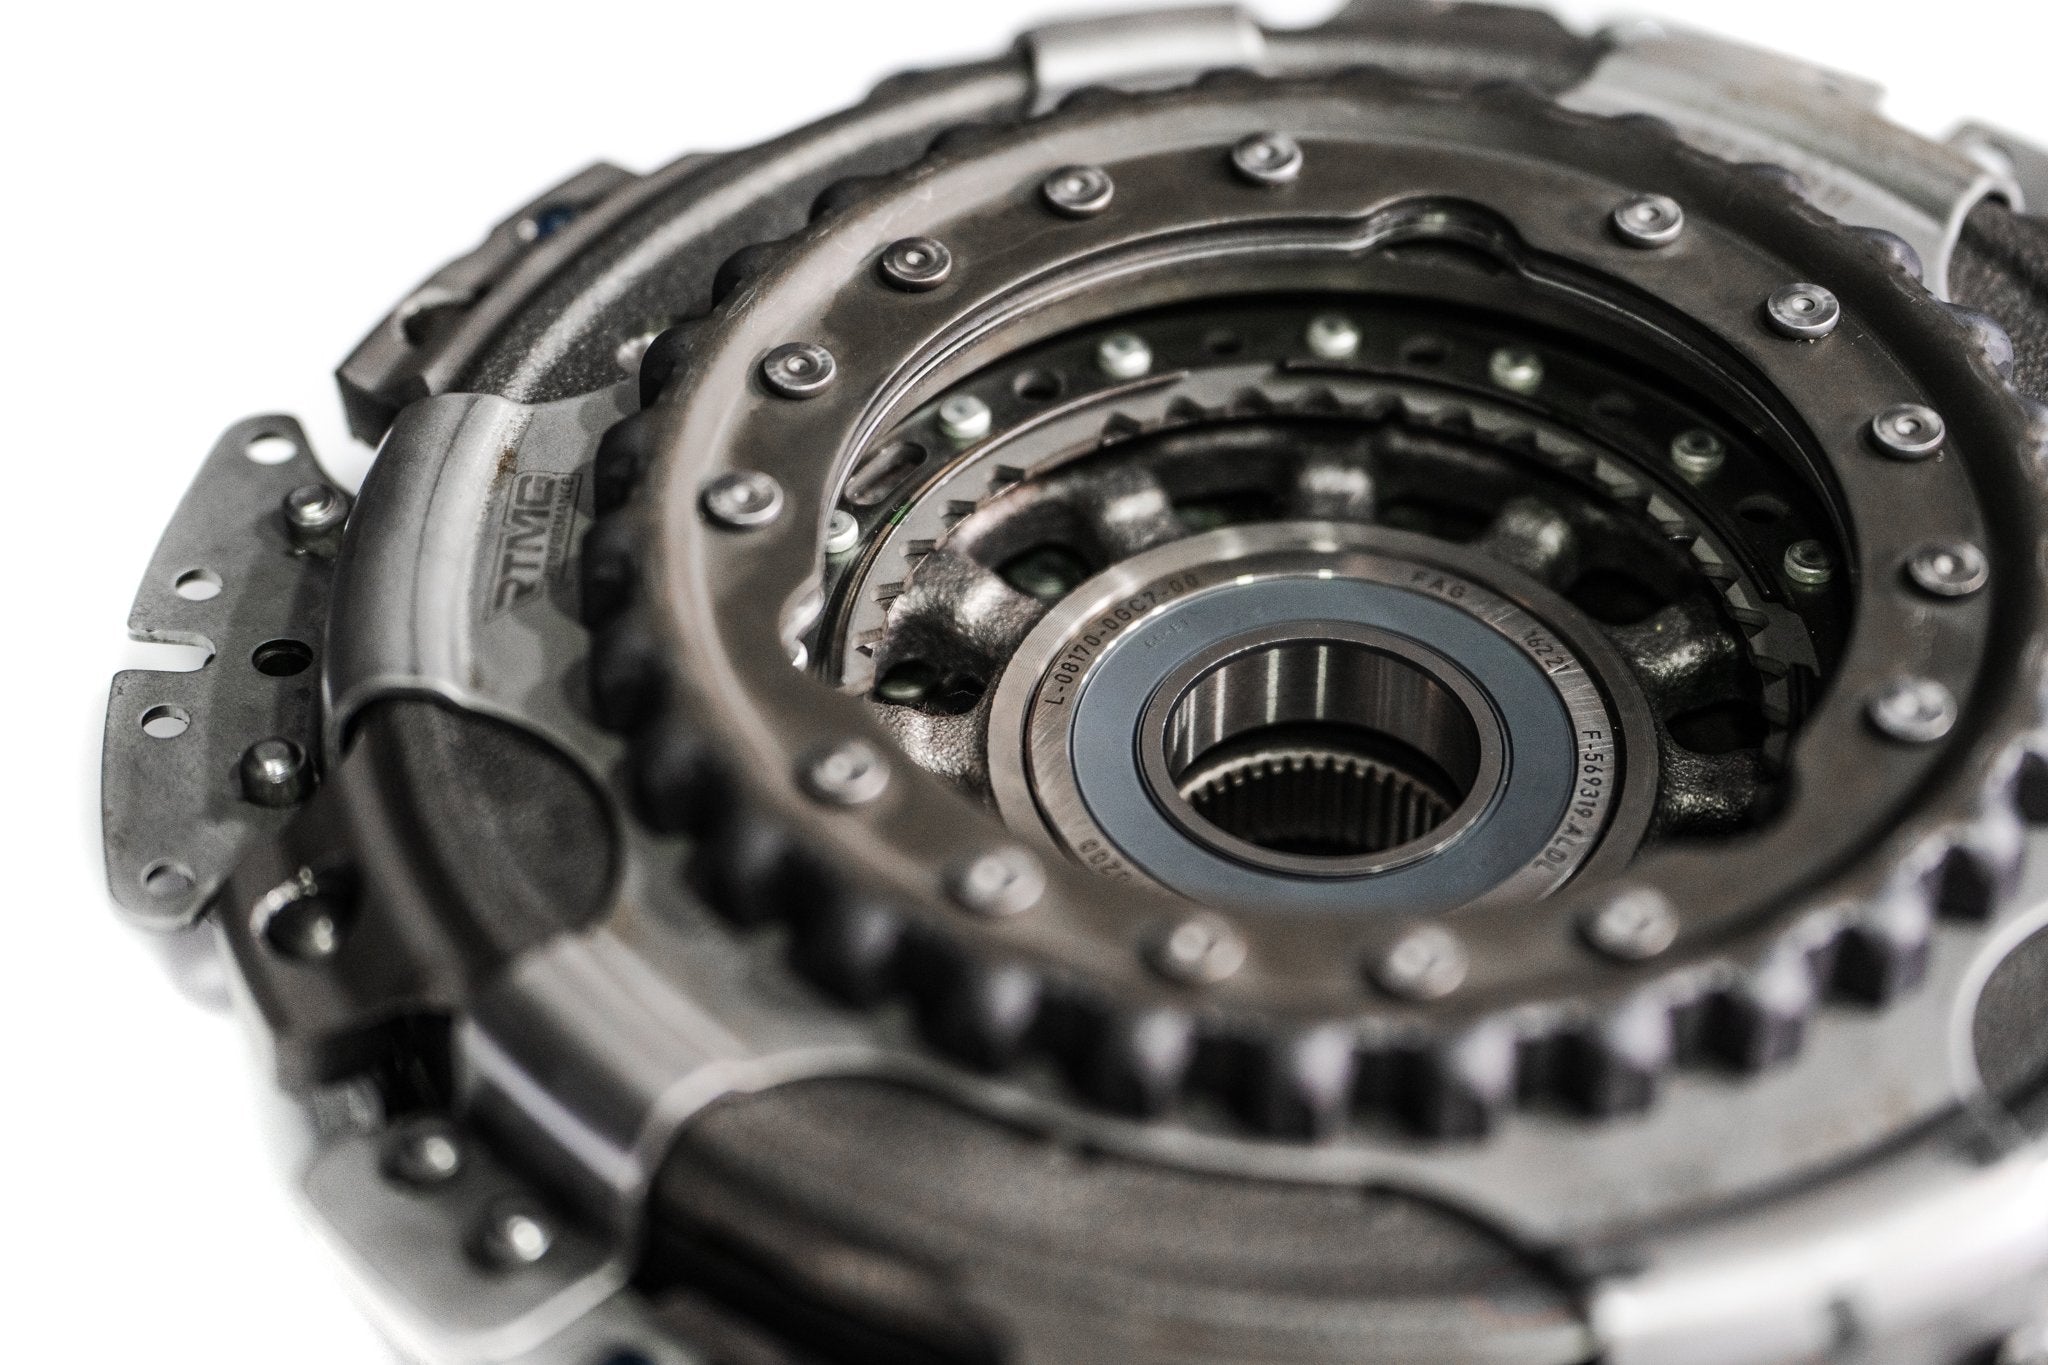 DSG DQ200 Gen 3 Upgraded Clutch with Kevlar Discs up to 470 Nm for MQB EA888 - RTMG Performance